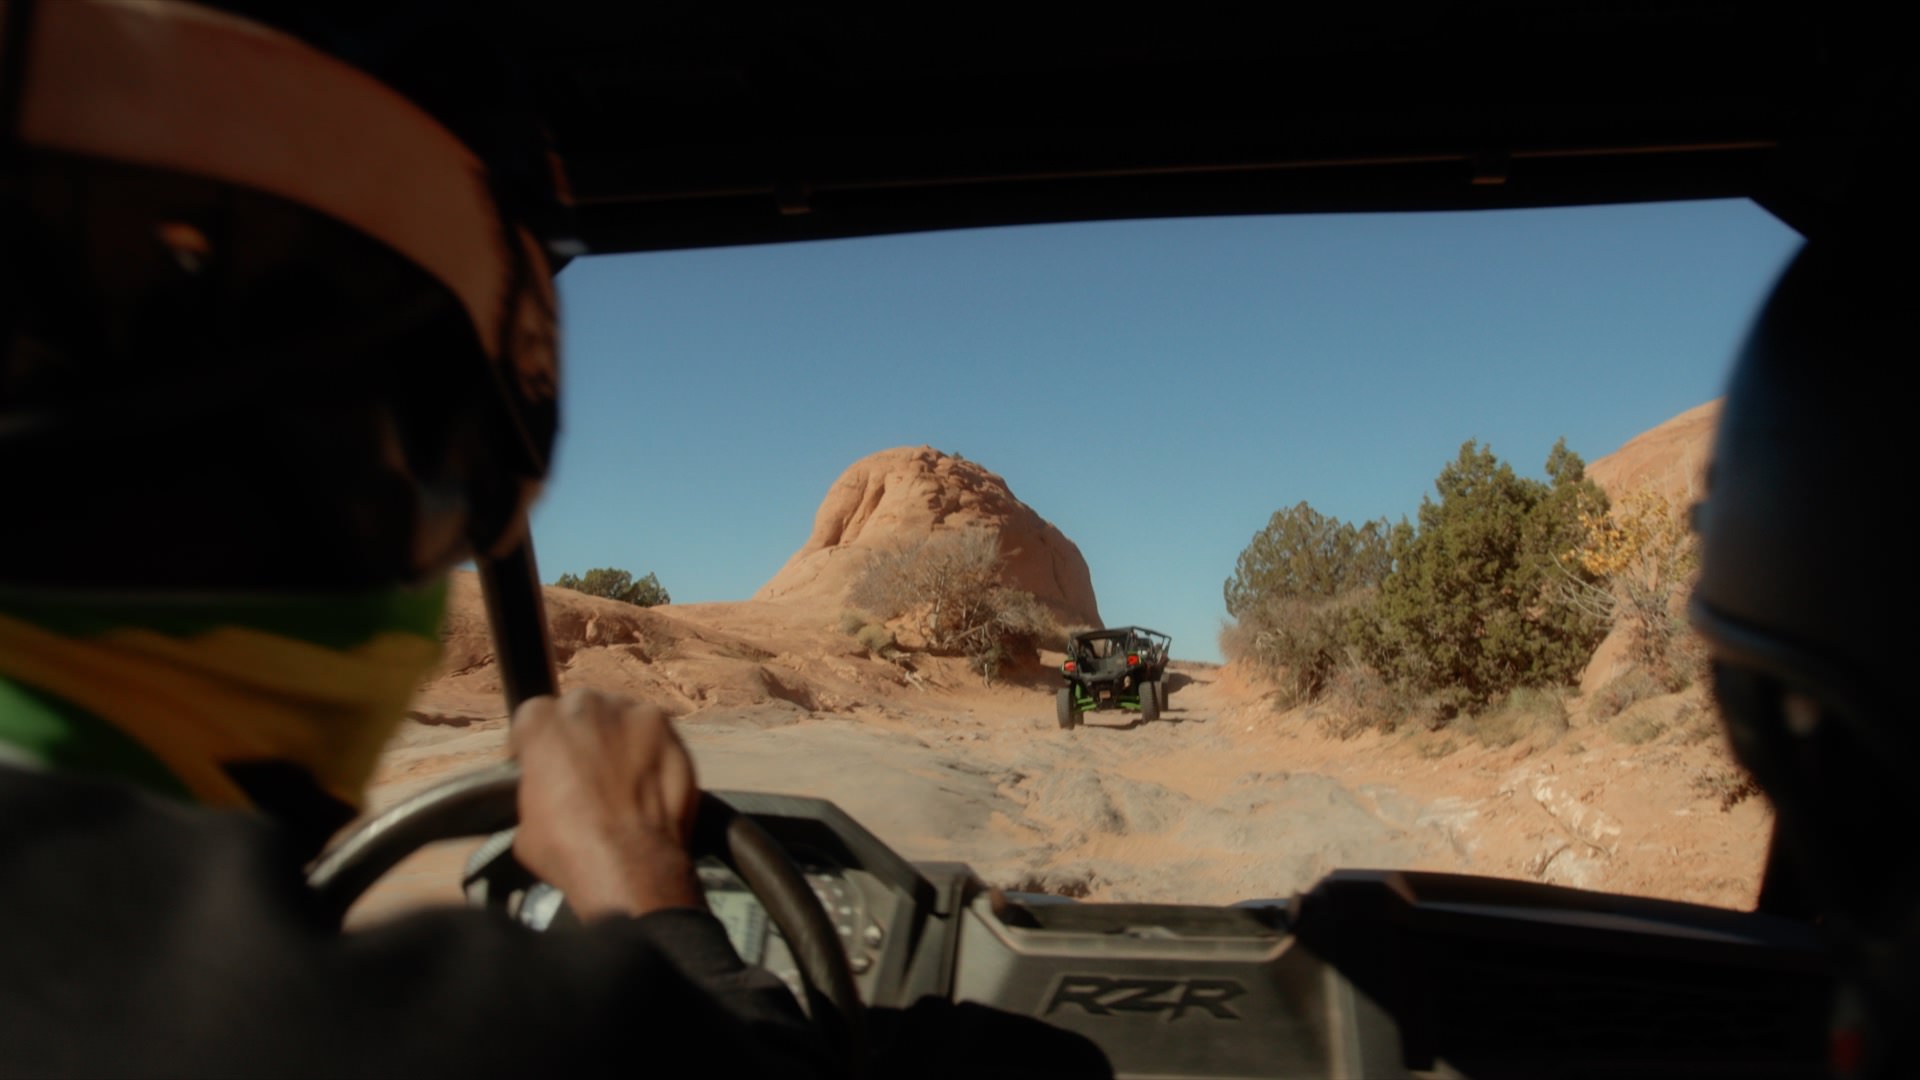 atvs driving through a trail in moab